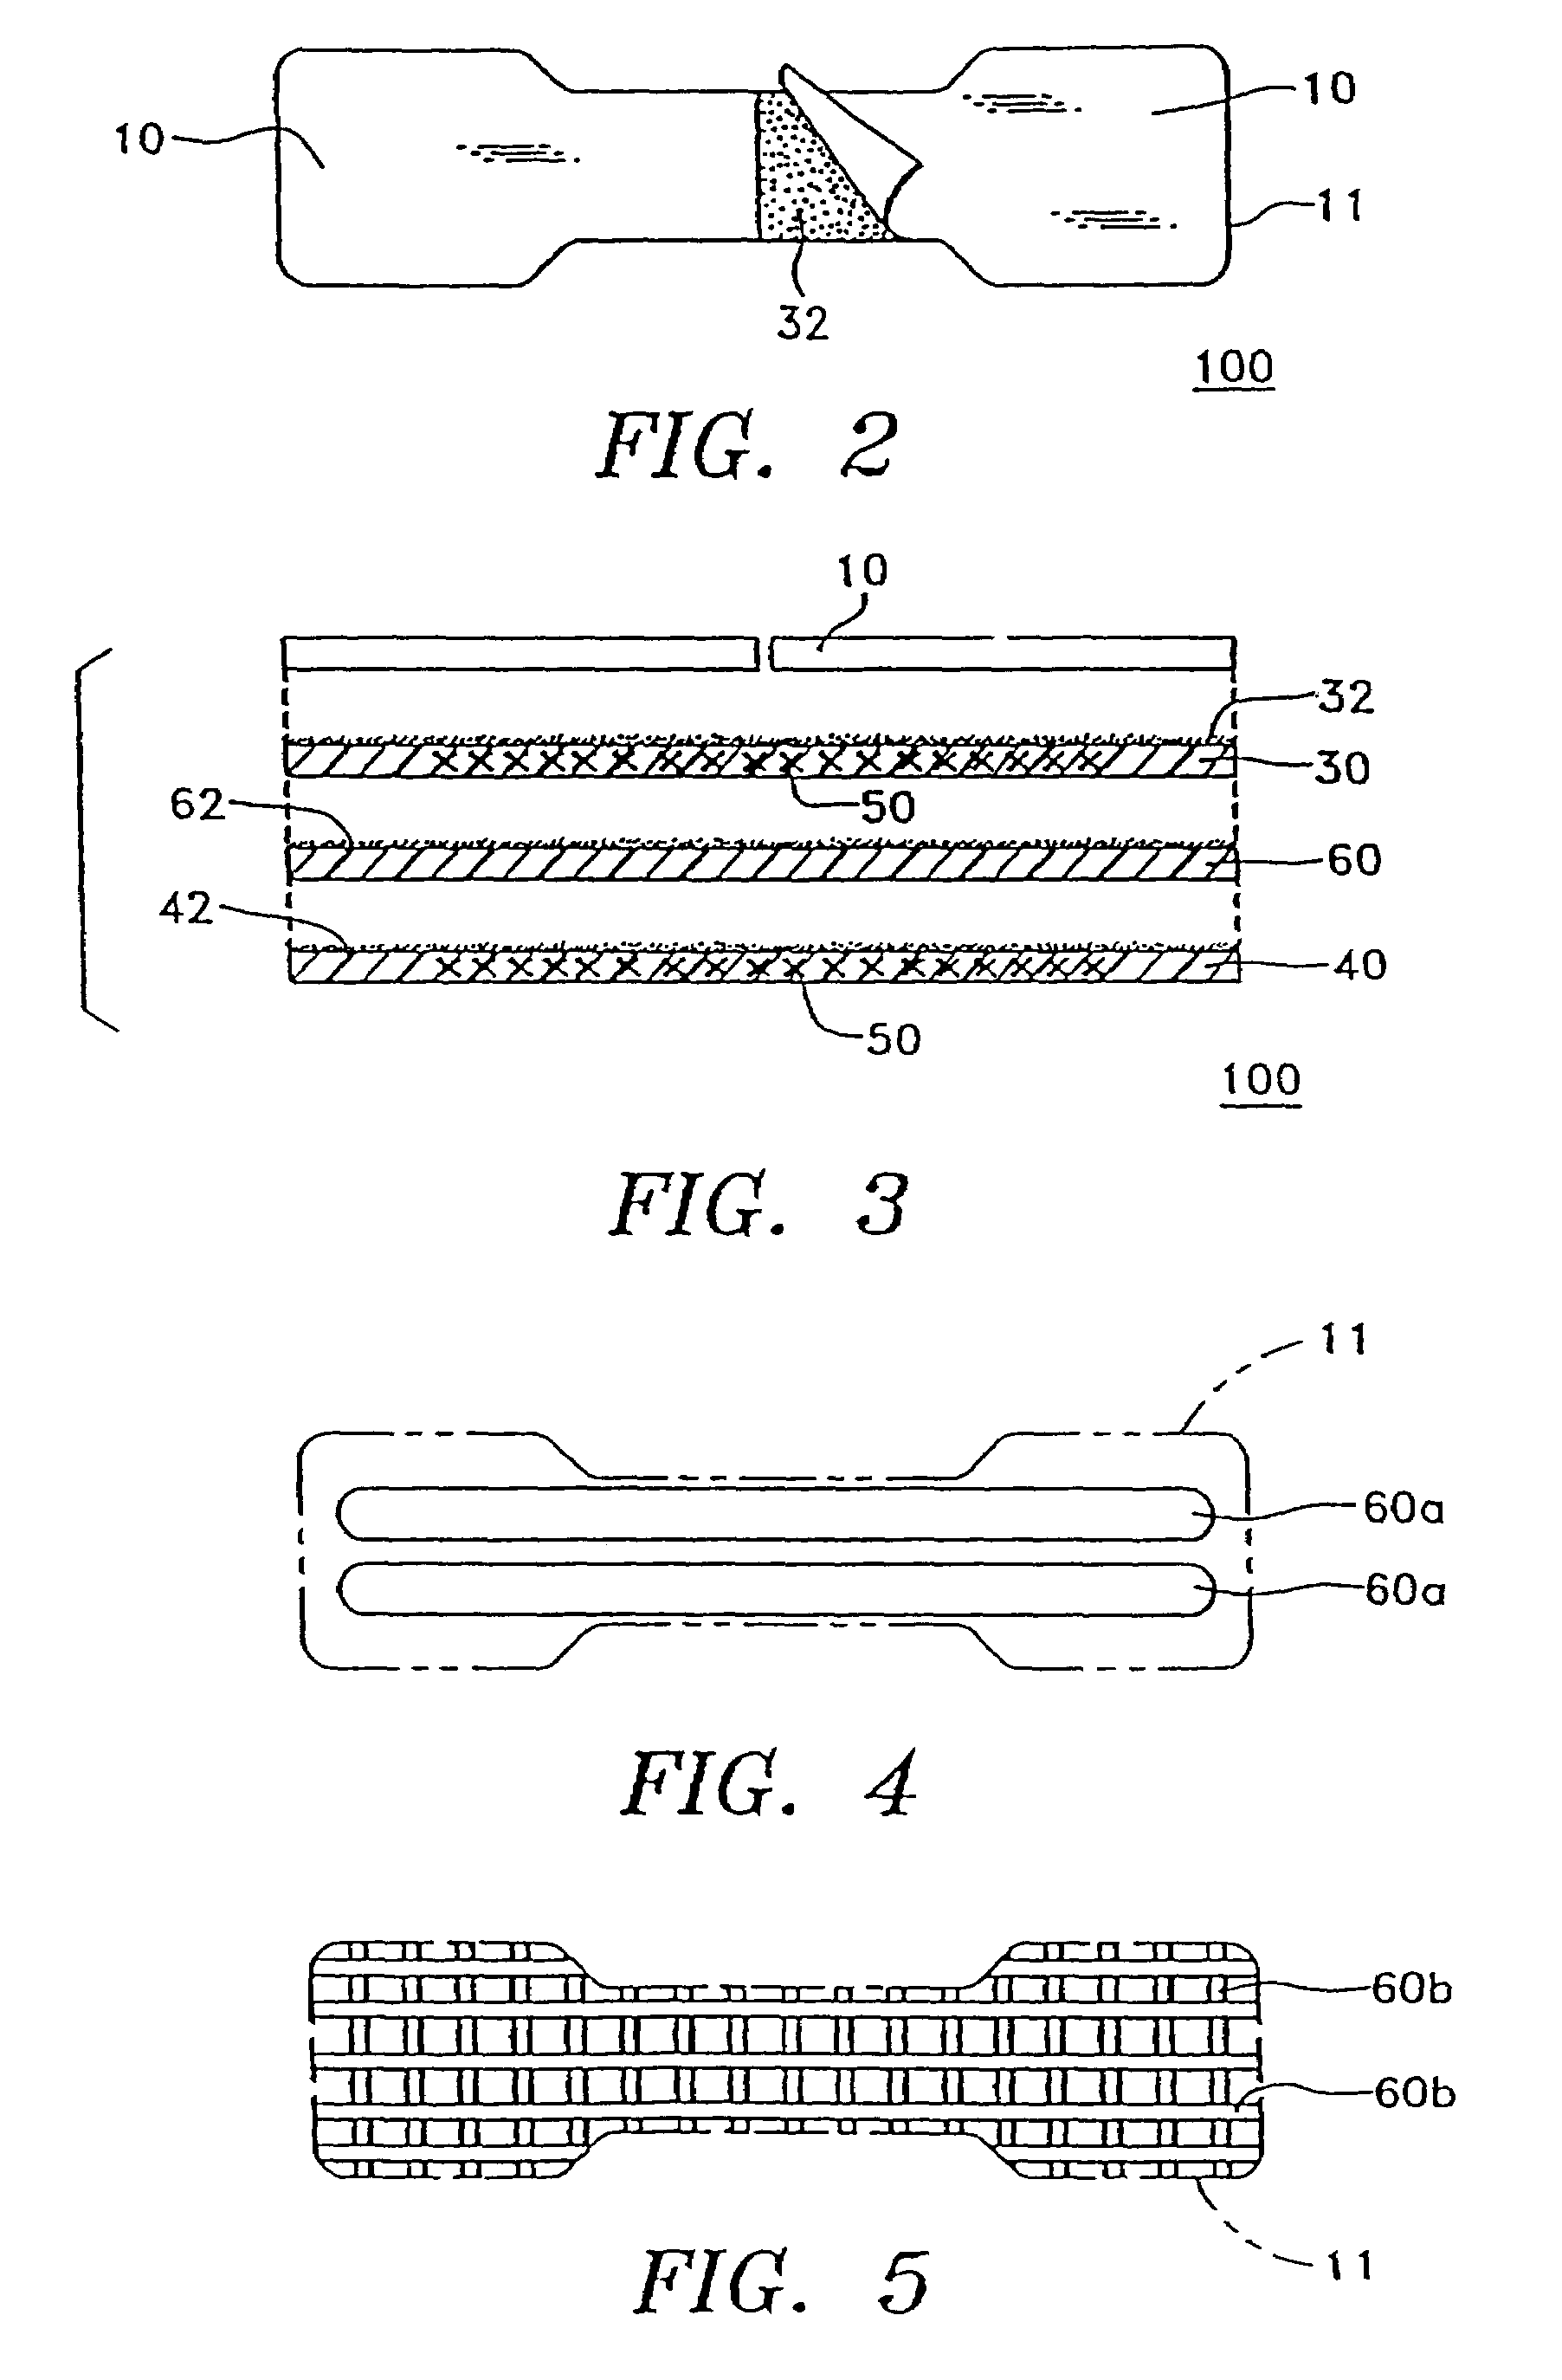 Microencapsulated fragrances and methods of coating microcapsules